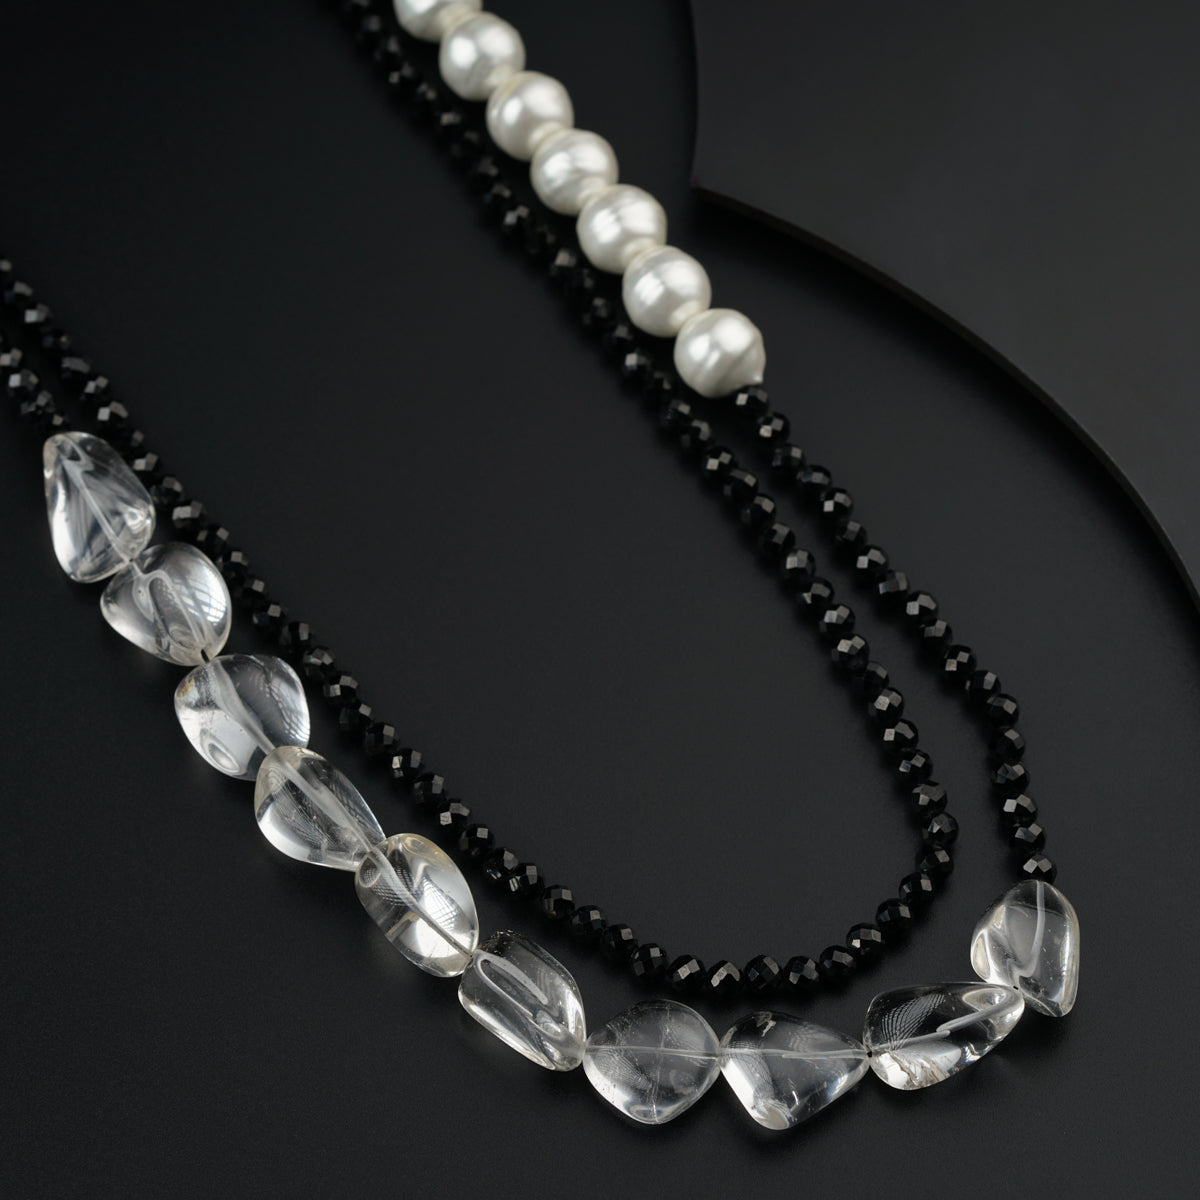 a black beaded necklace with white pearls and black beads